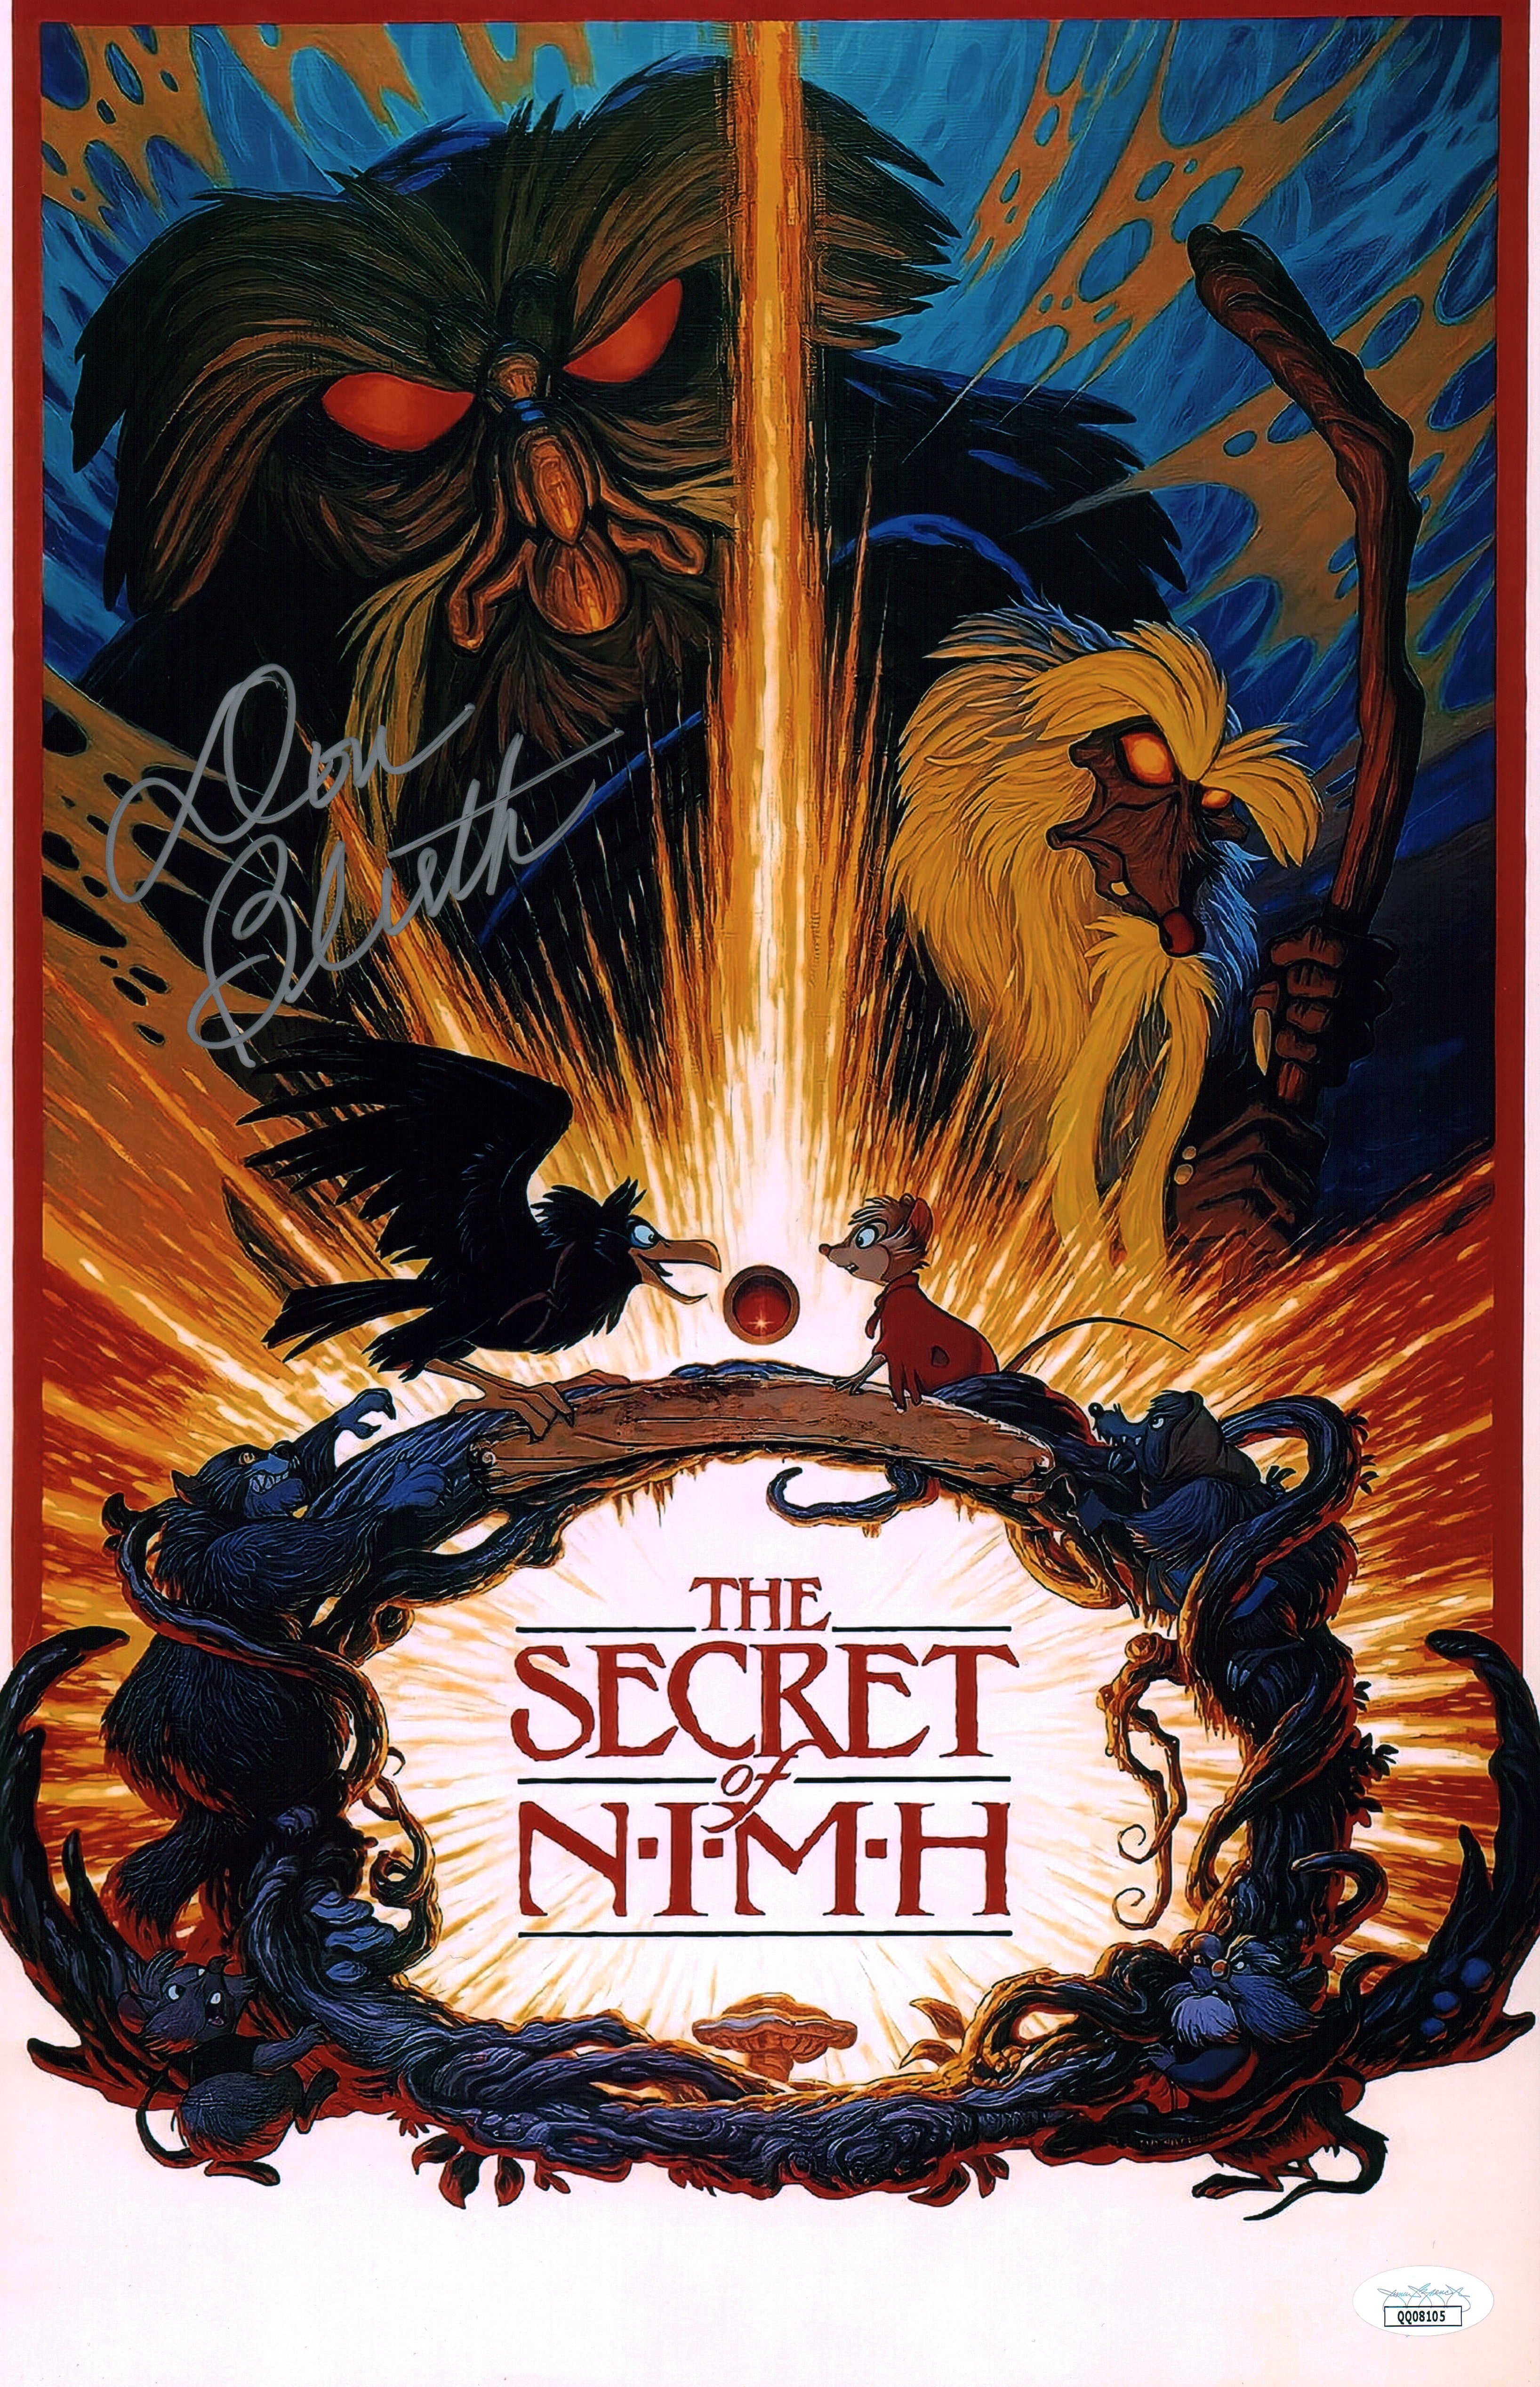 Don Bluth The Secret of NIMH 11x17 Photo Poster Signed Autograph JSA Certified COA Auto GalaxyCon